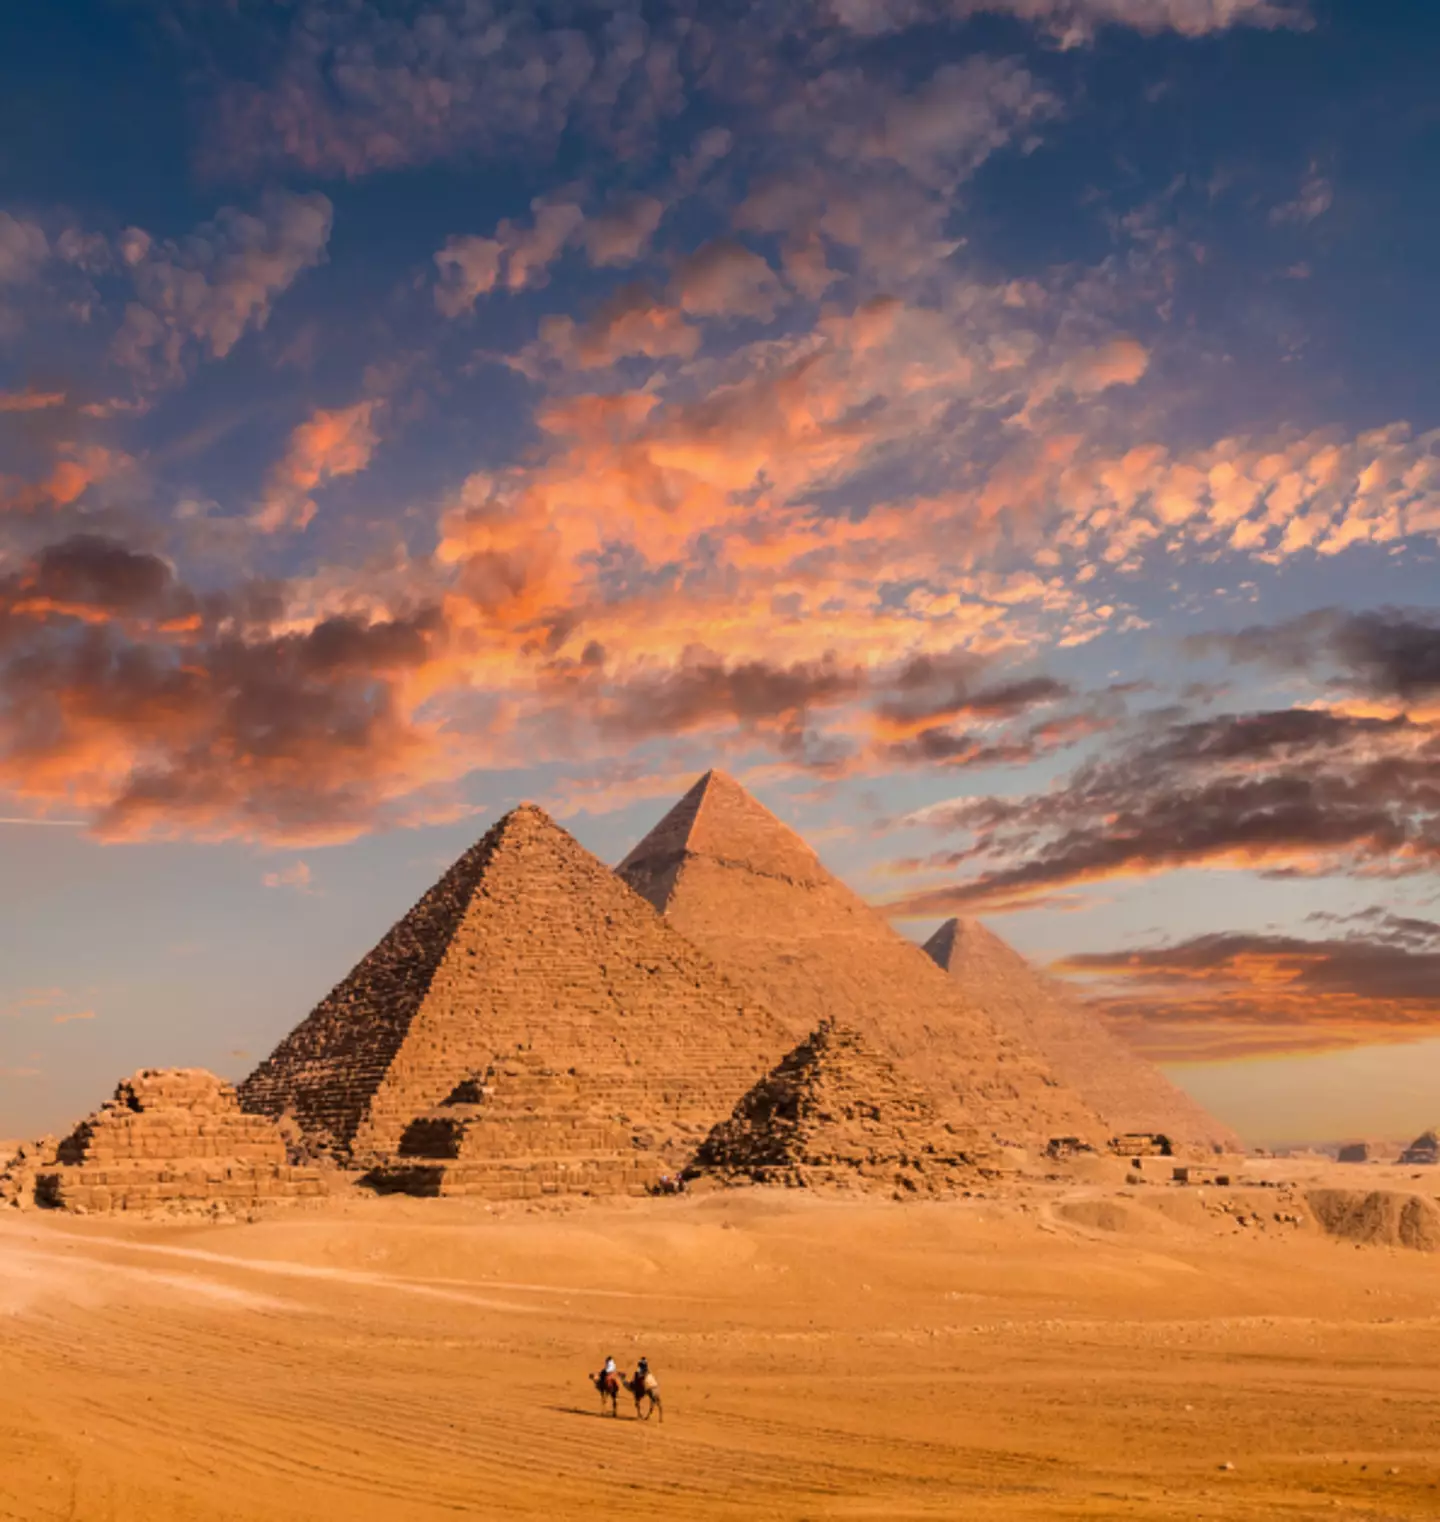 The ancient pyramids are thought to be around 4,000 years old. (Getty Stock Images)